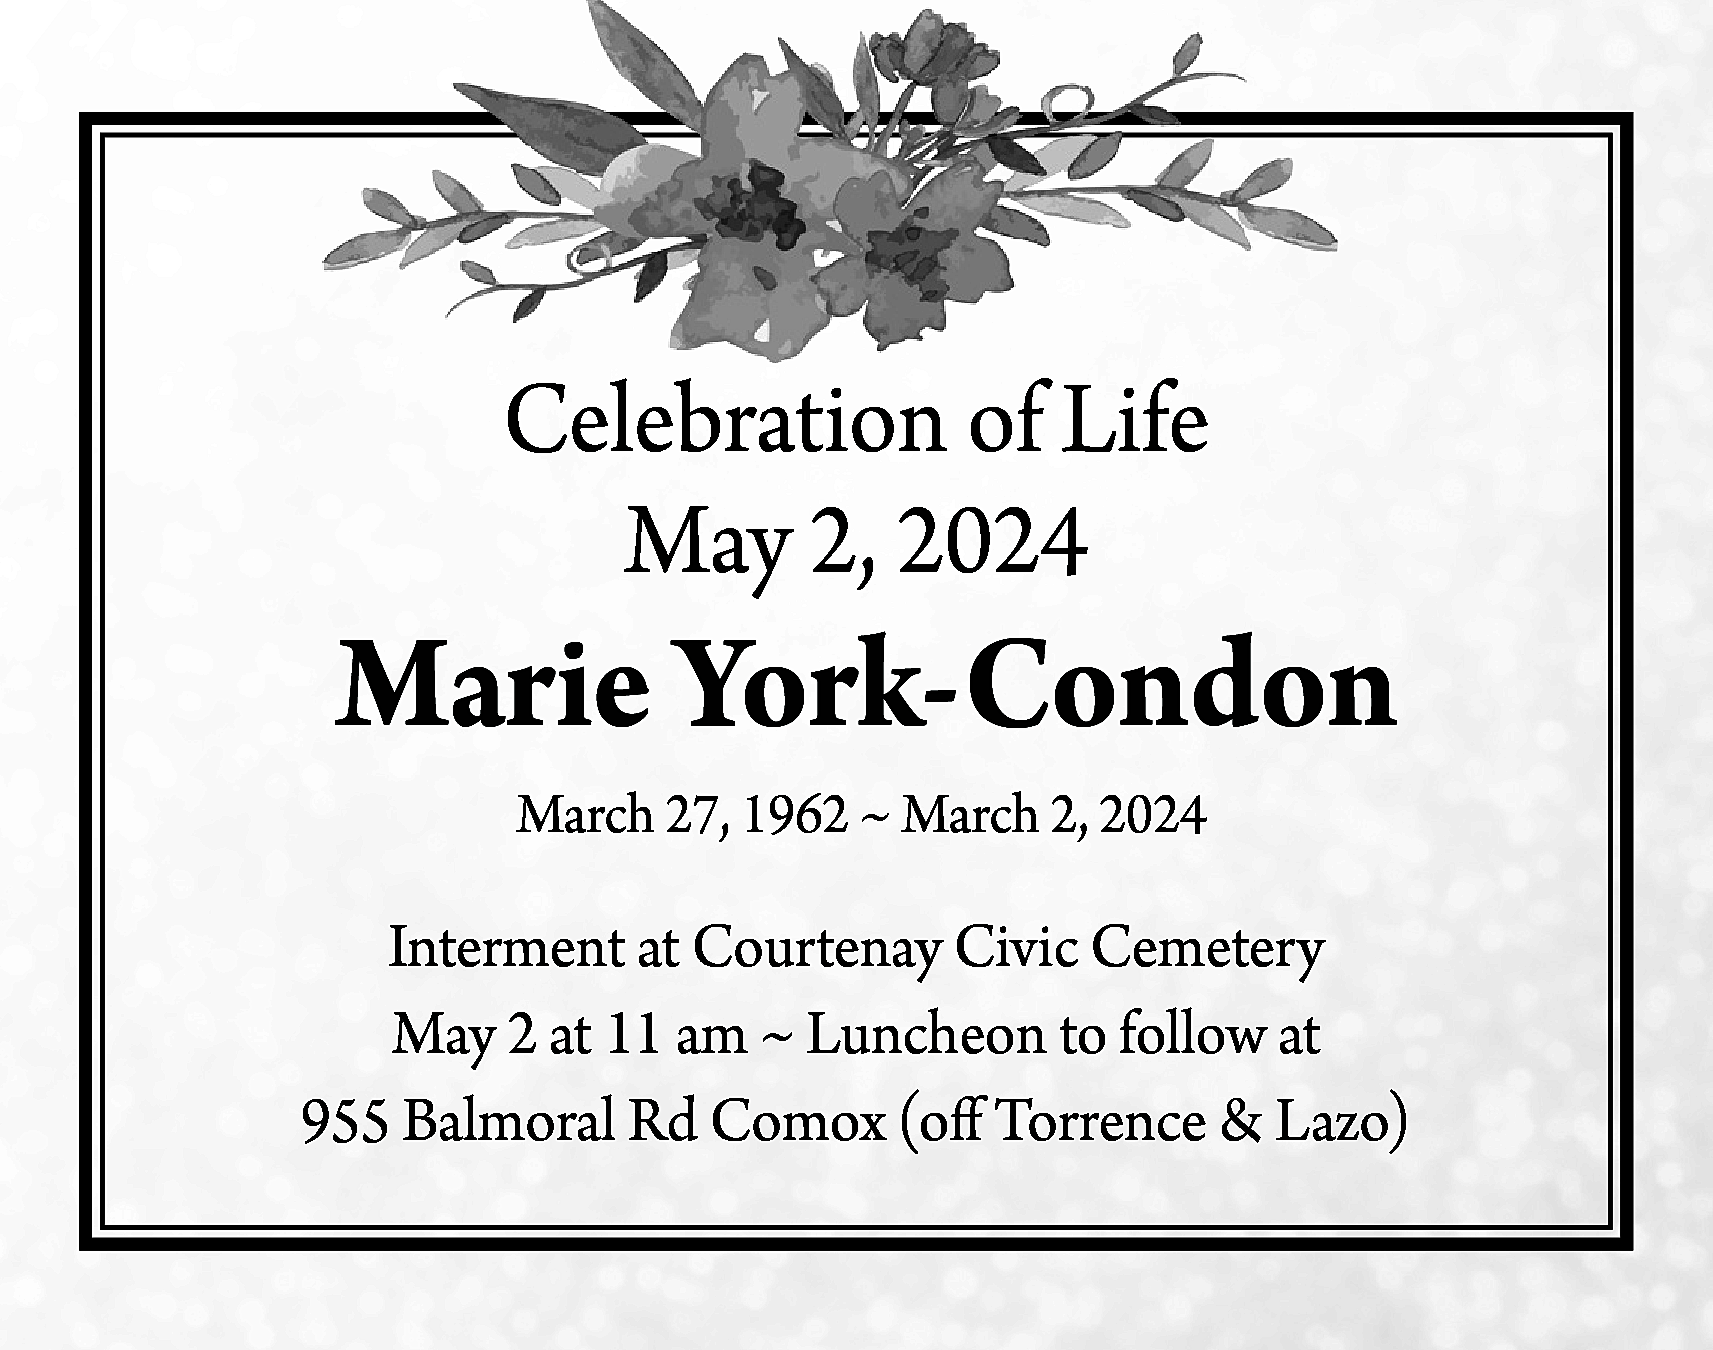 Celebration of Life <br>May 2,  Celebration of Life  May 2, 2024    Marie York-Condon  March 27, 1962 ~ March 2, 2024    Interment at Courtenay Civic Cemetery  May 2 at 11 am ~ Luncheon to follow at  955 Balmoral Rd Comox (off Torrence & Lazo)    